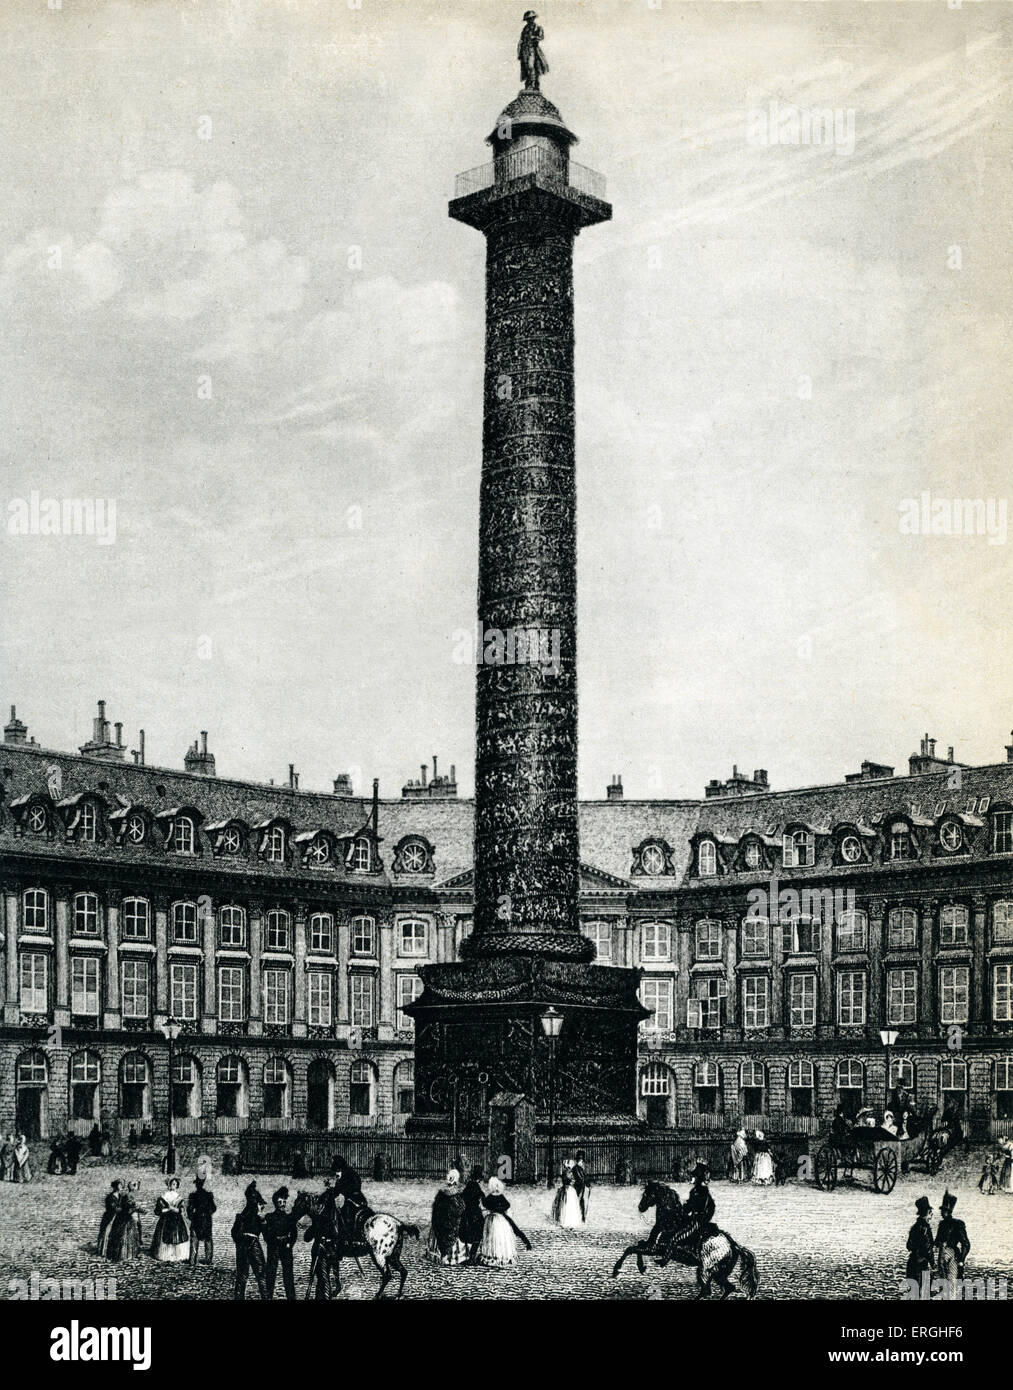 Place Vendôme in Paris France with it's iconic green column in the